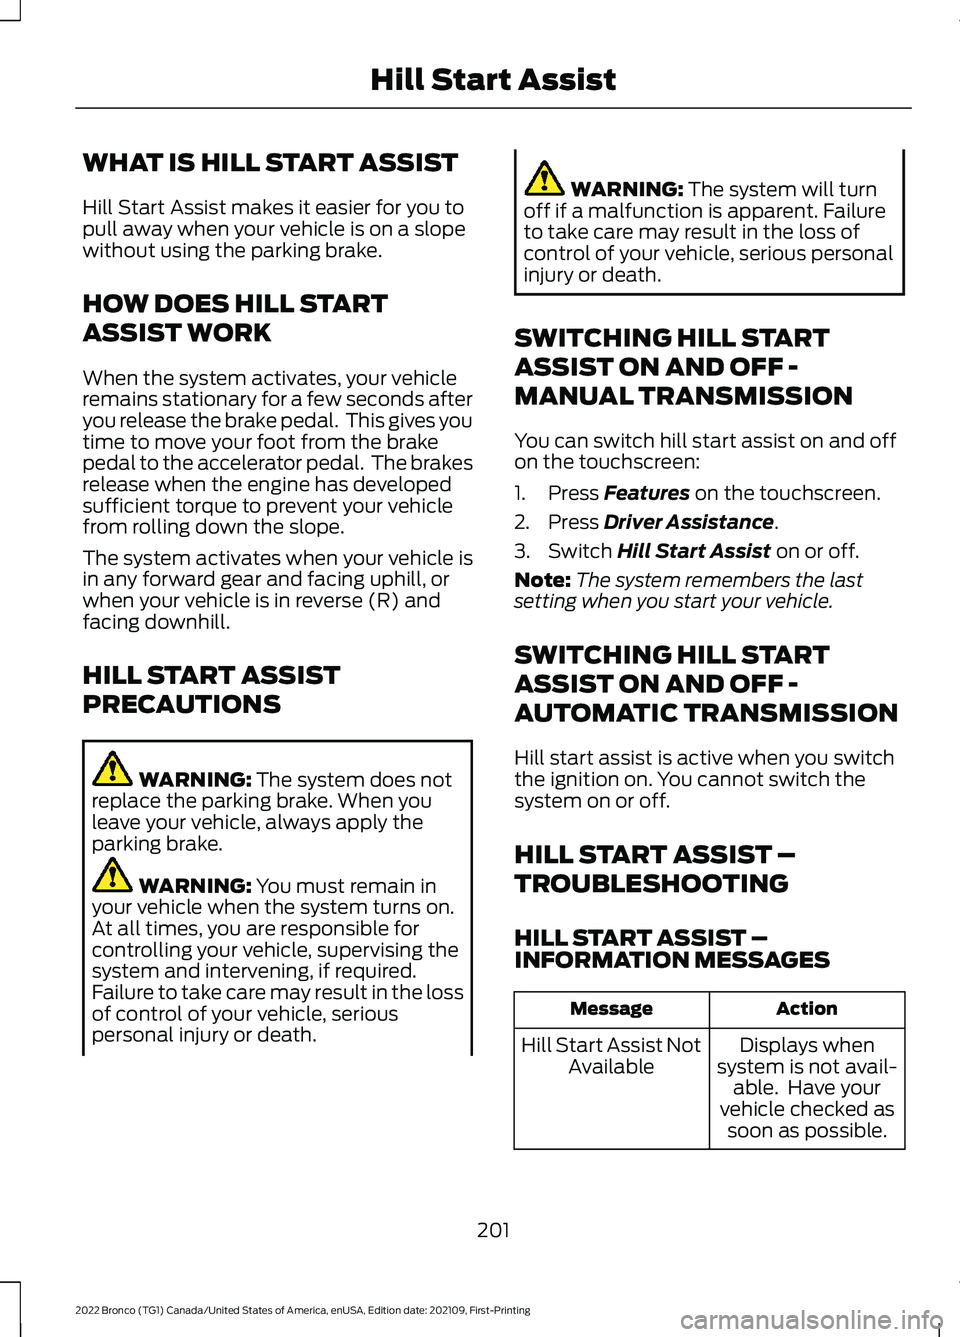 FORD BRONCO 2022 User Guide WHAT IS HILL START ASSIST
Hill Start Assist makes it easier for you topull away when your vehicle is on a slopewithout using the parking brake.
HOW DOES HILL START
ASSIST WORK
When the system activate